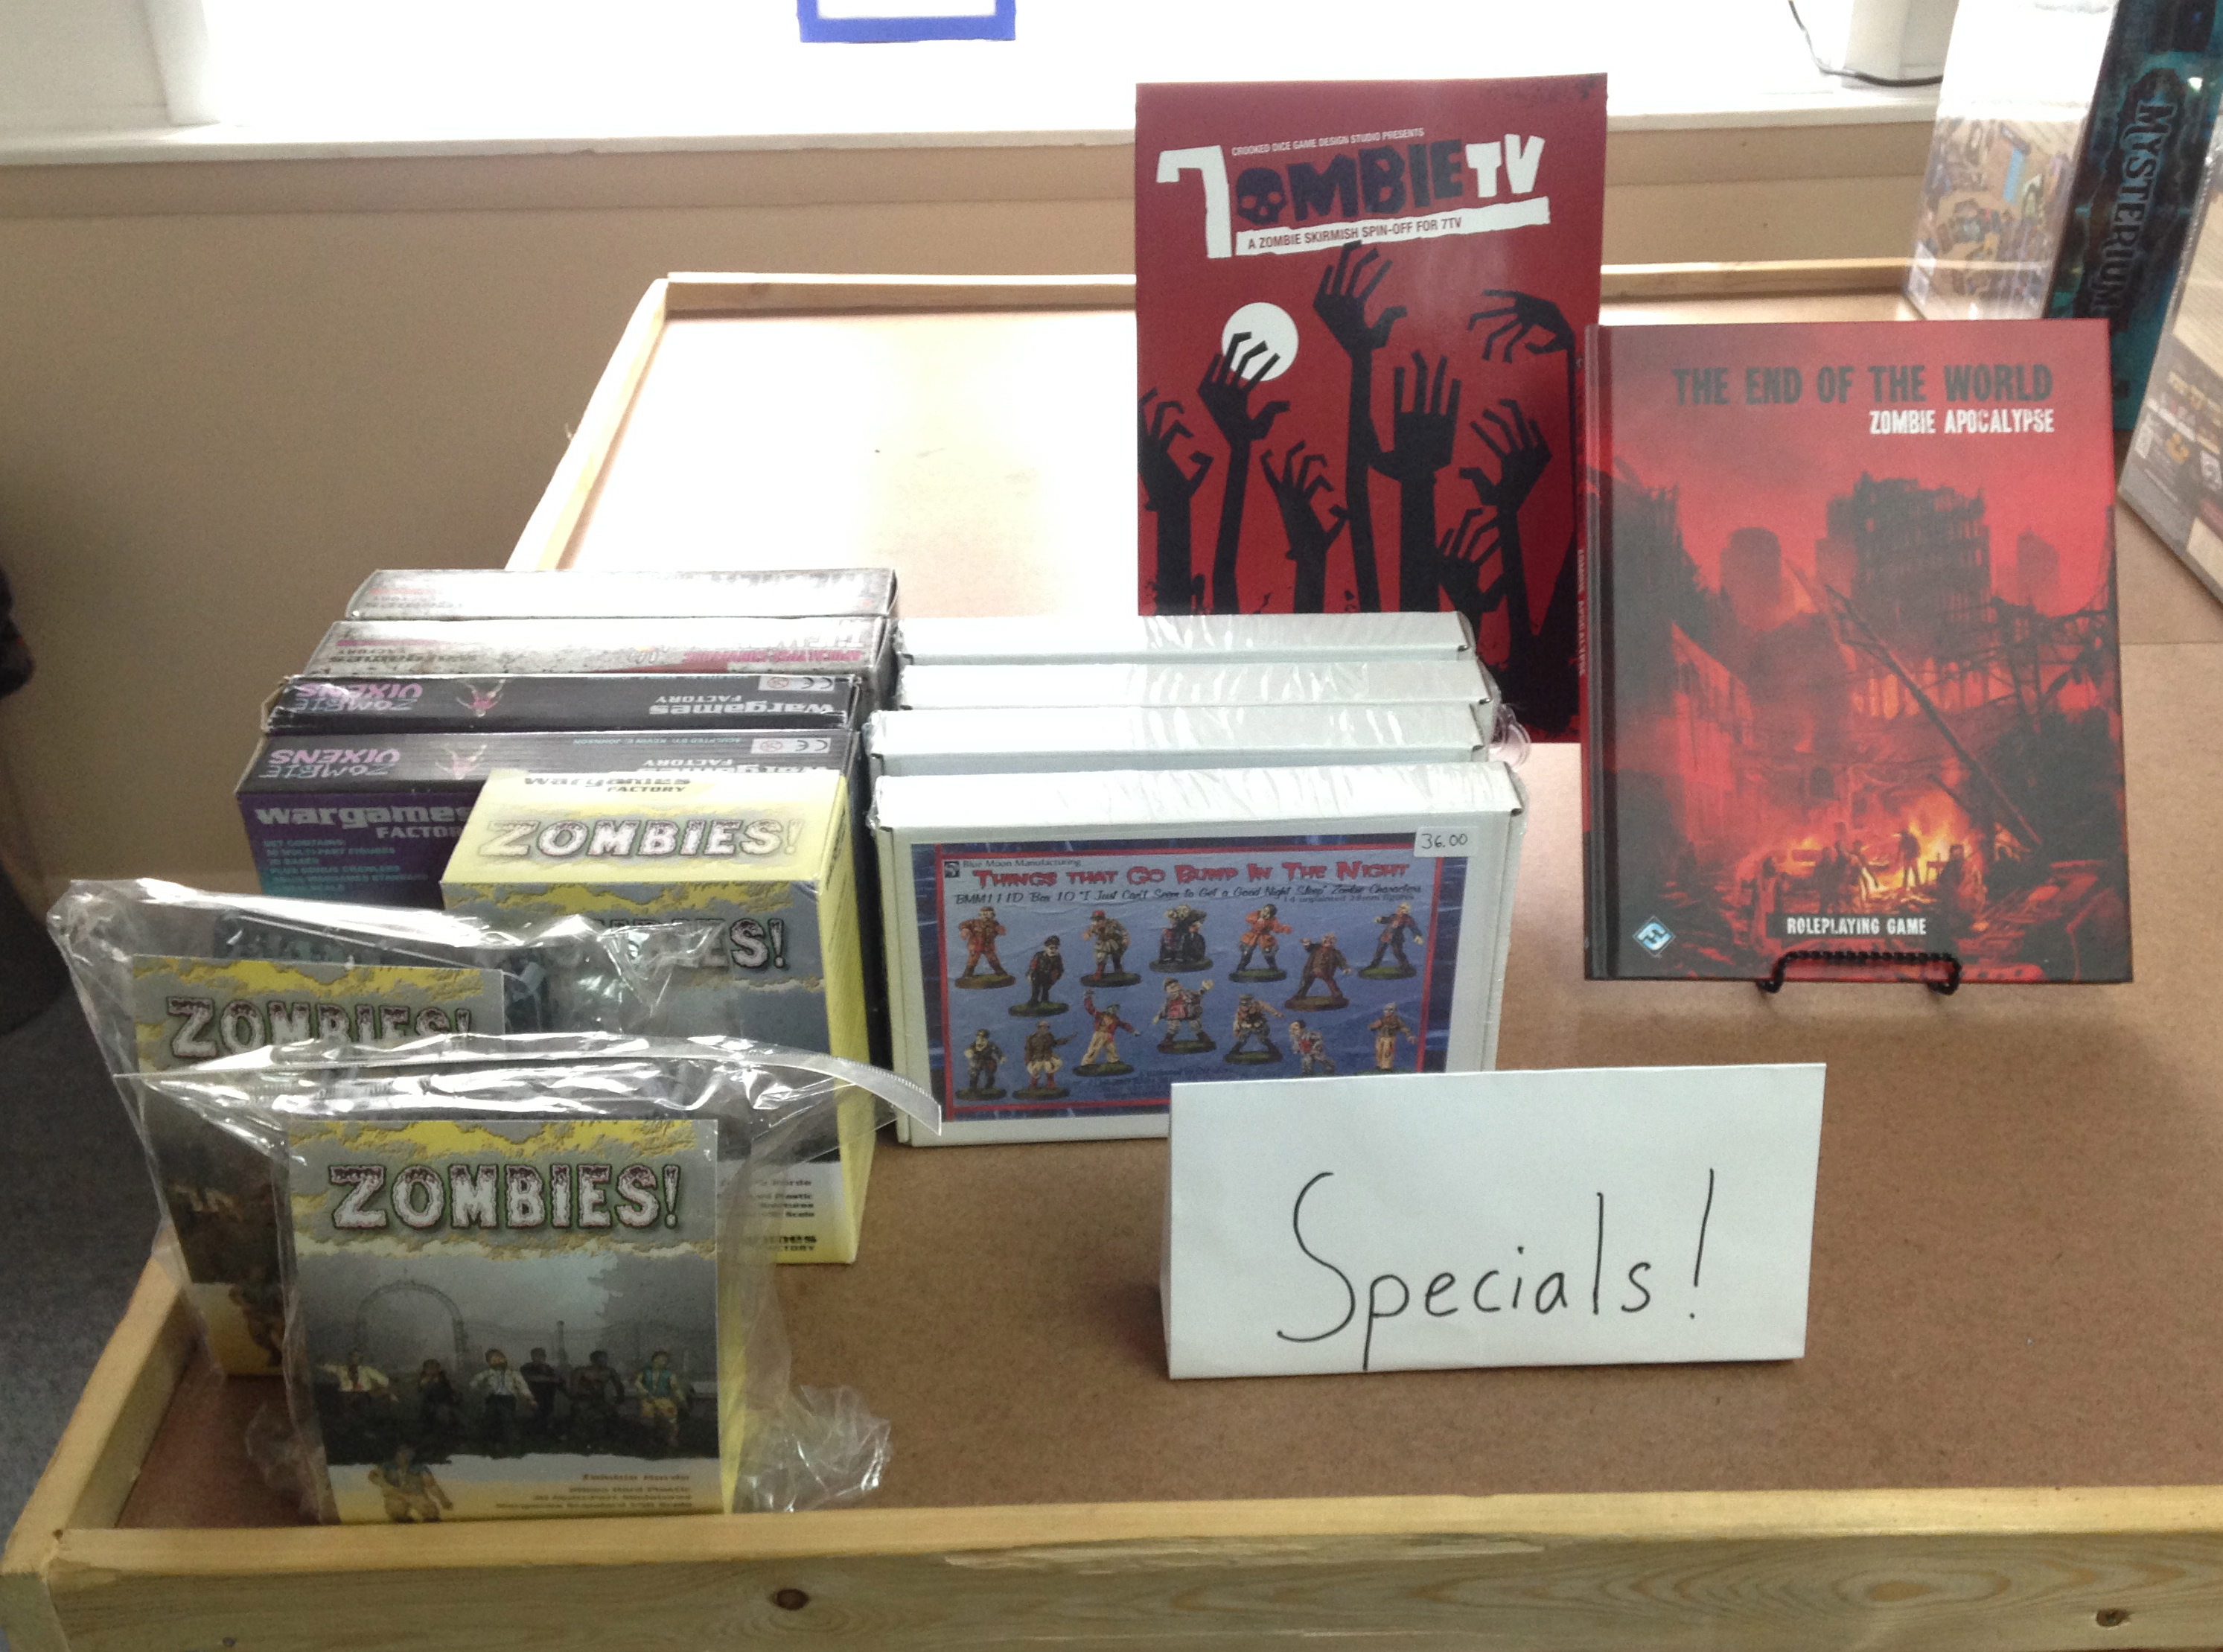 This Week’s Specials! (10/14/15) Zombie Horror Sale!